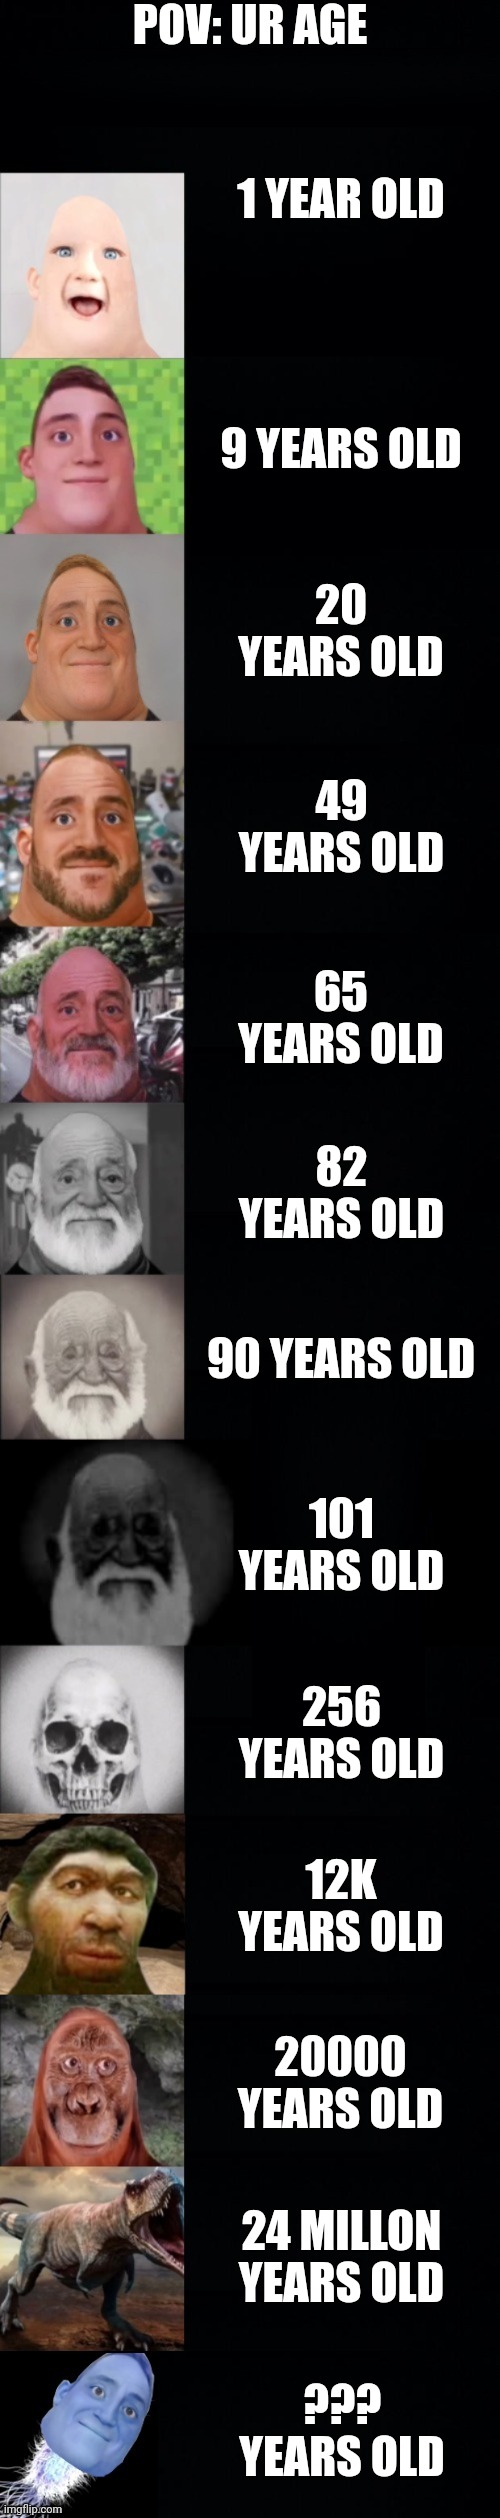 Just A Mr Incredible Becoming Old Meme | POV: UR AGE; 1 YEAR OLD; 9 YEARS OLD; 20 YEARS OLD; 49 YEARS OLD; 65 YEARS OLD; 82 YEARS OLD; 90 YEARS OLD; 101 YEARS OLD; 256 YEARS OLD; 12K YEARS OLD; 20000 YEARS OLD; 24 MILLON YEARS OLD; ??? YEARS OLD | image tagged in ur age | made w/ Imgflip meme maker